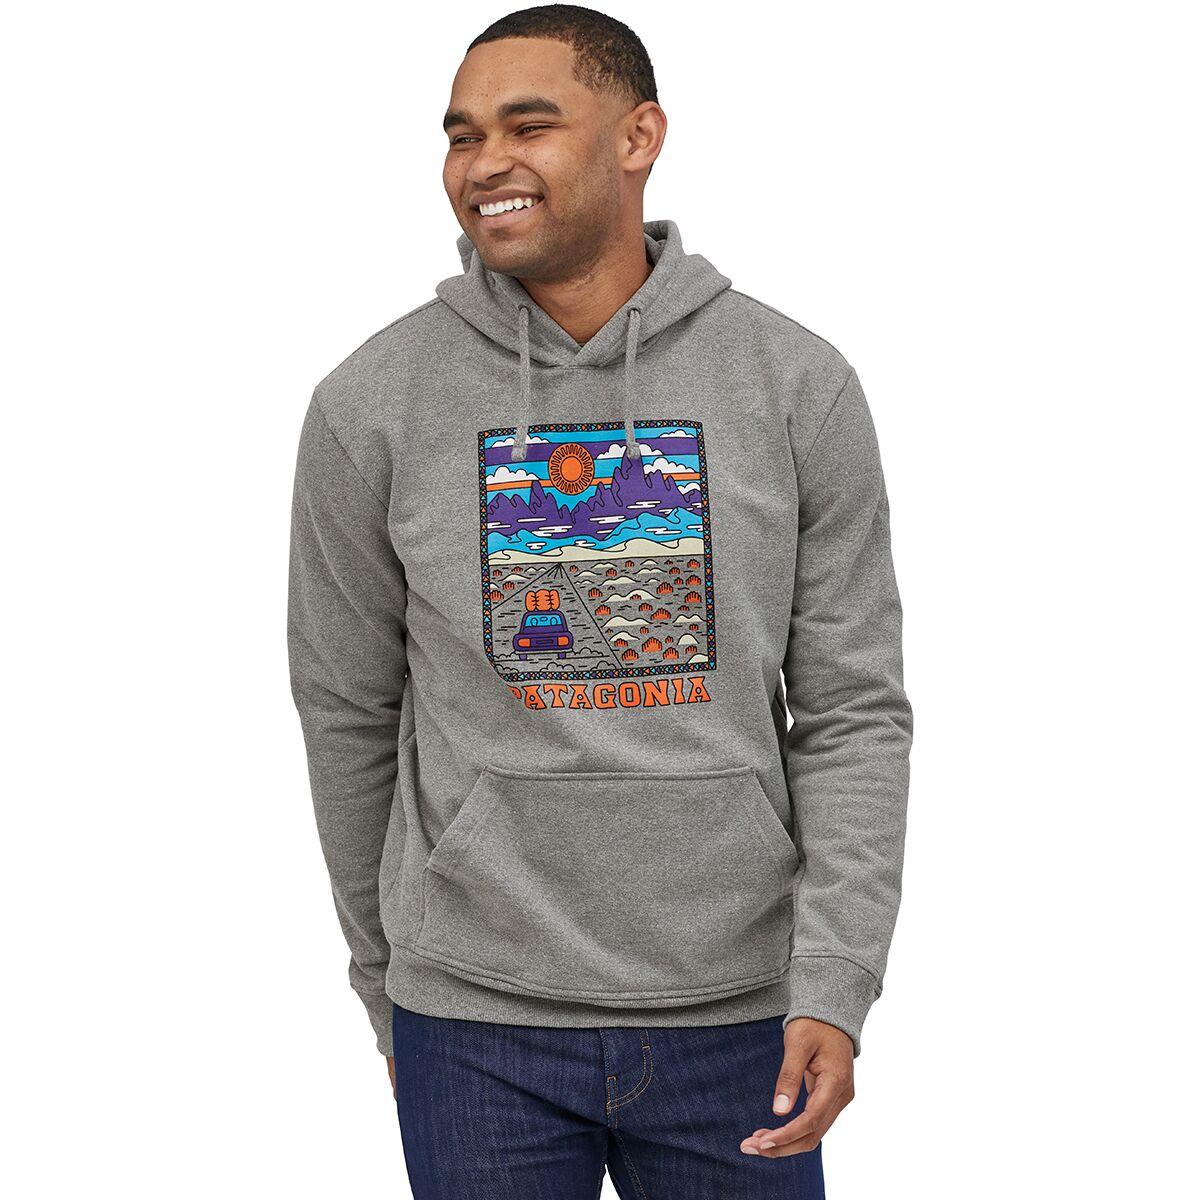 Patagonia Cotton Summit Road Uprisal Hoodie in Gray for Men - Lyst